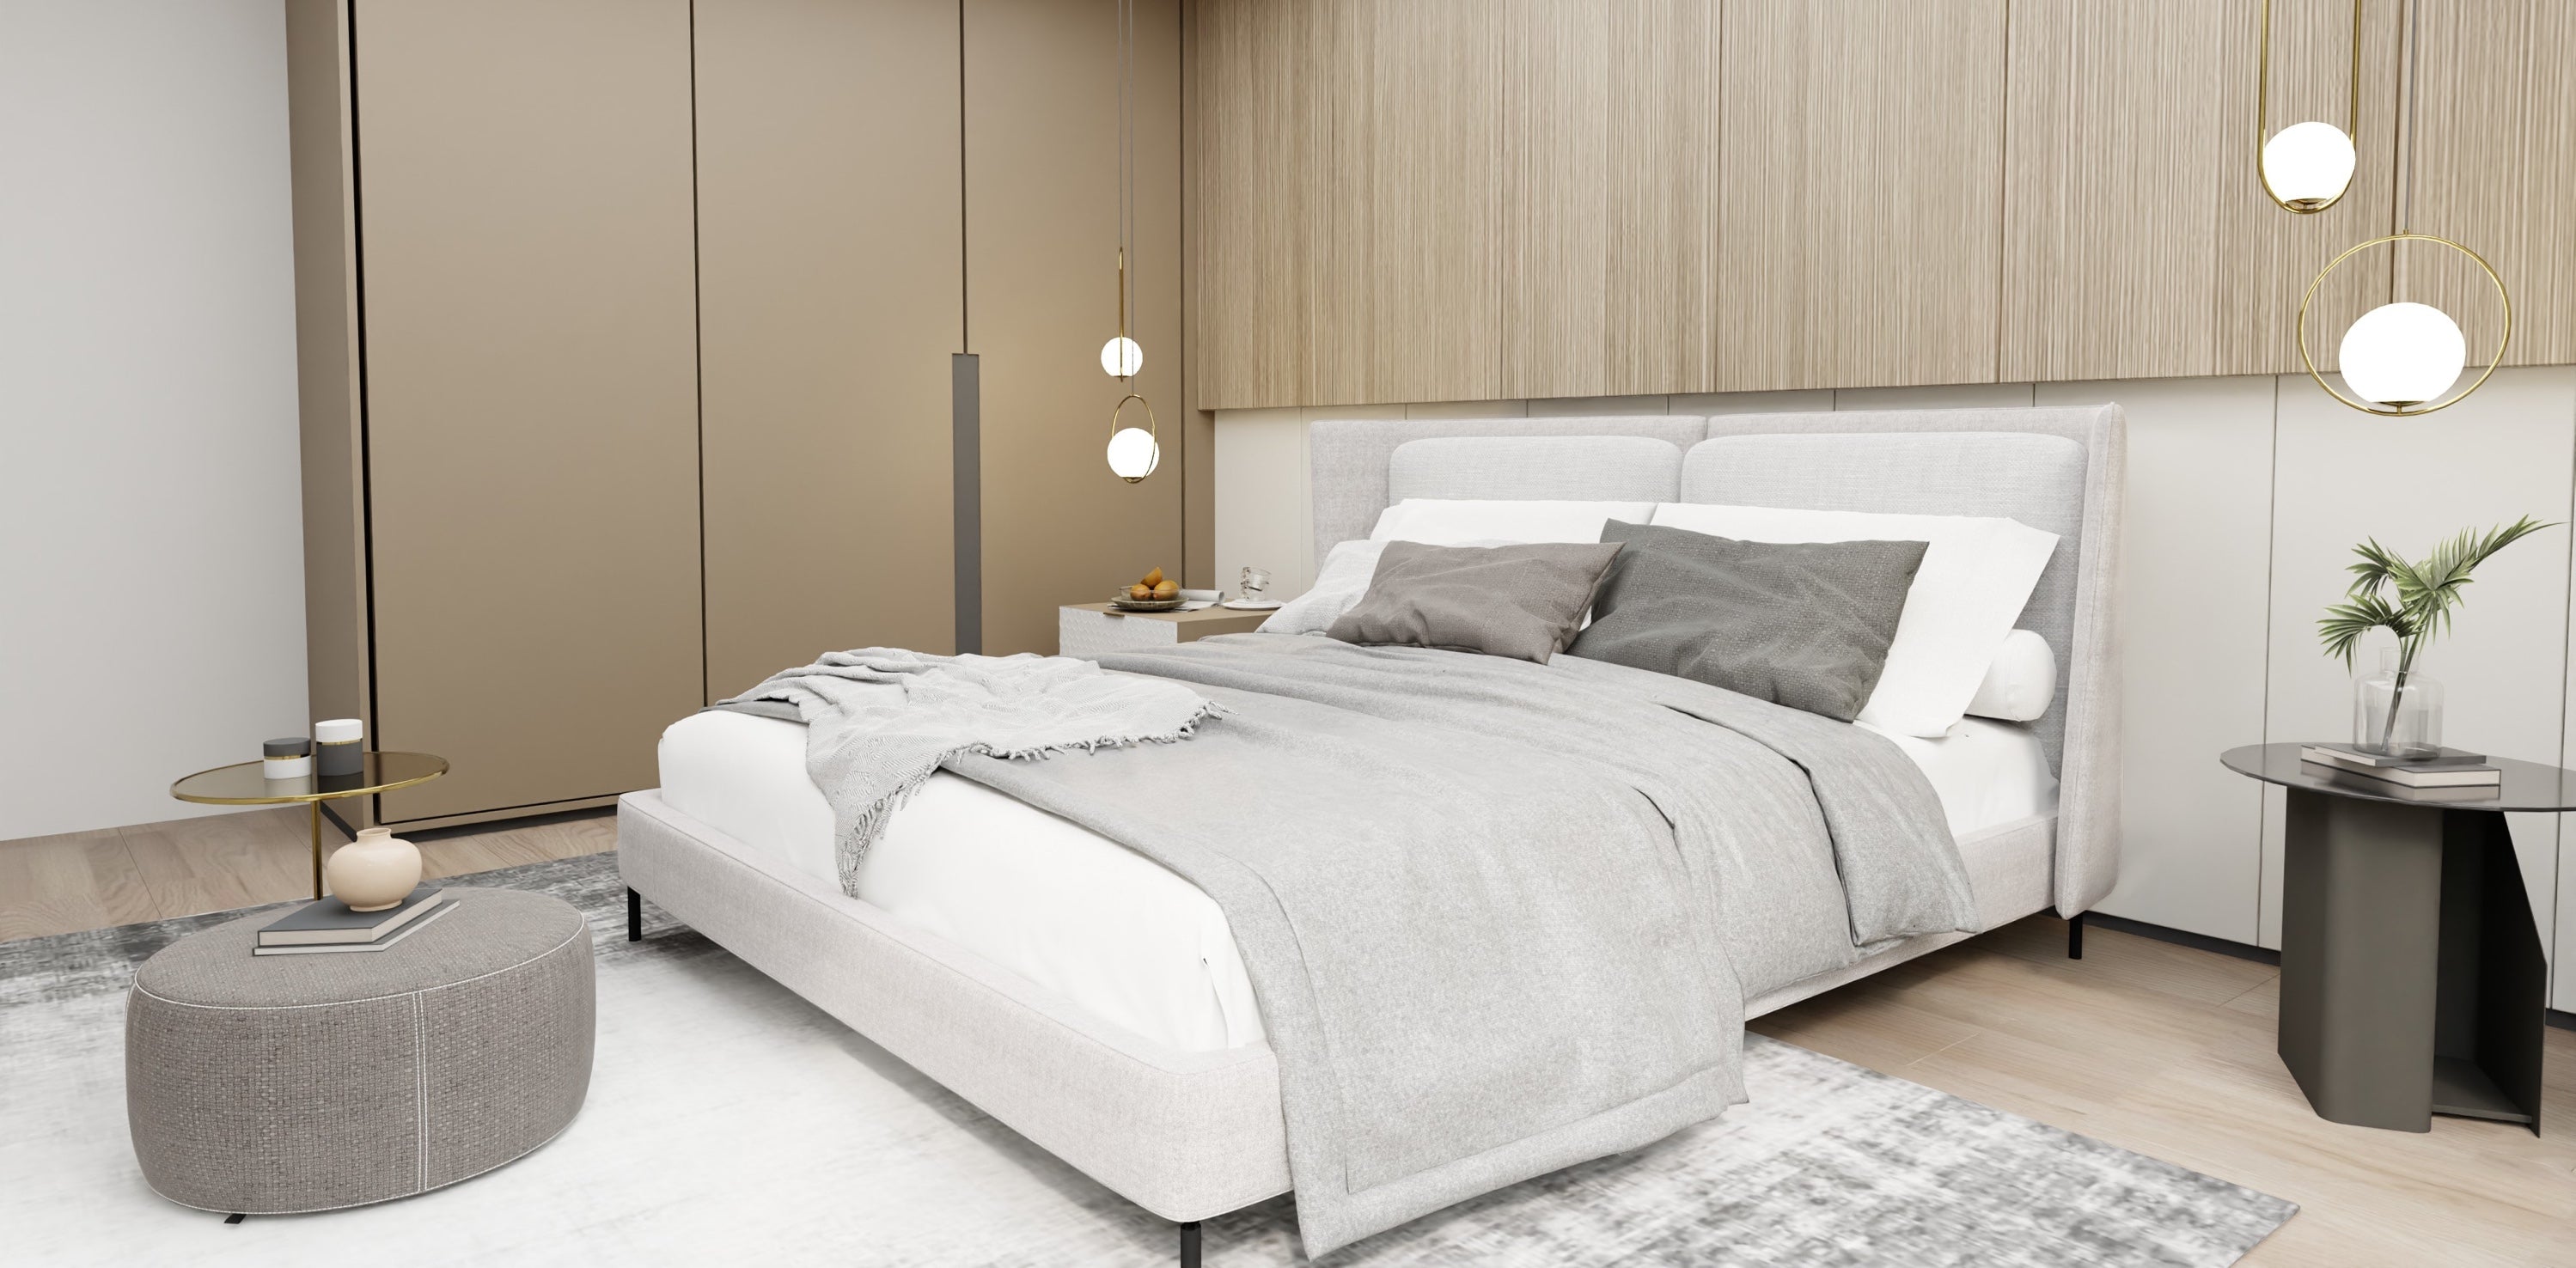 Bedroom with neutral colors